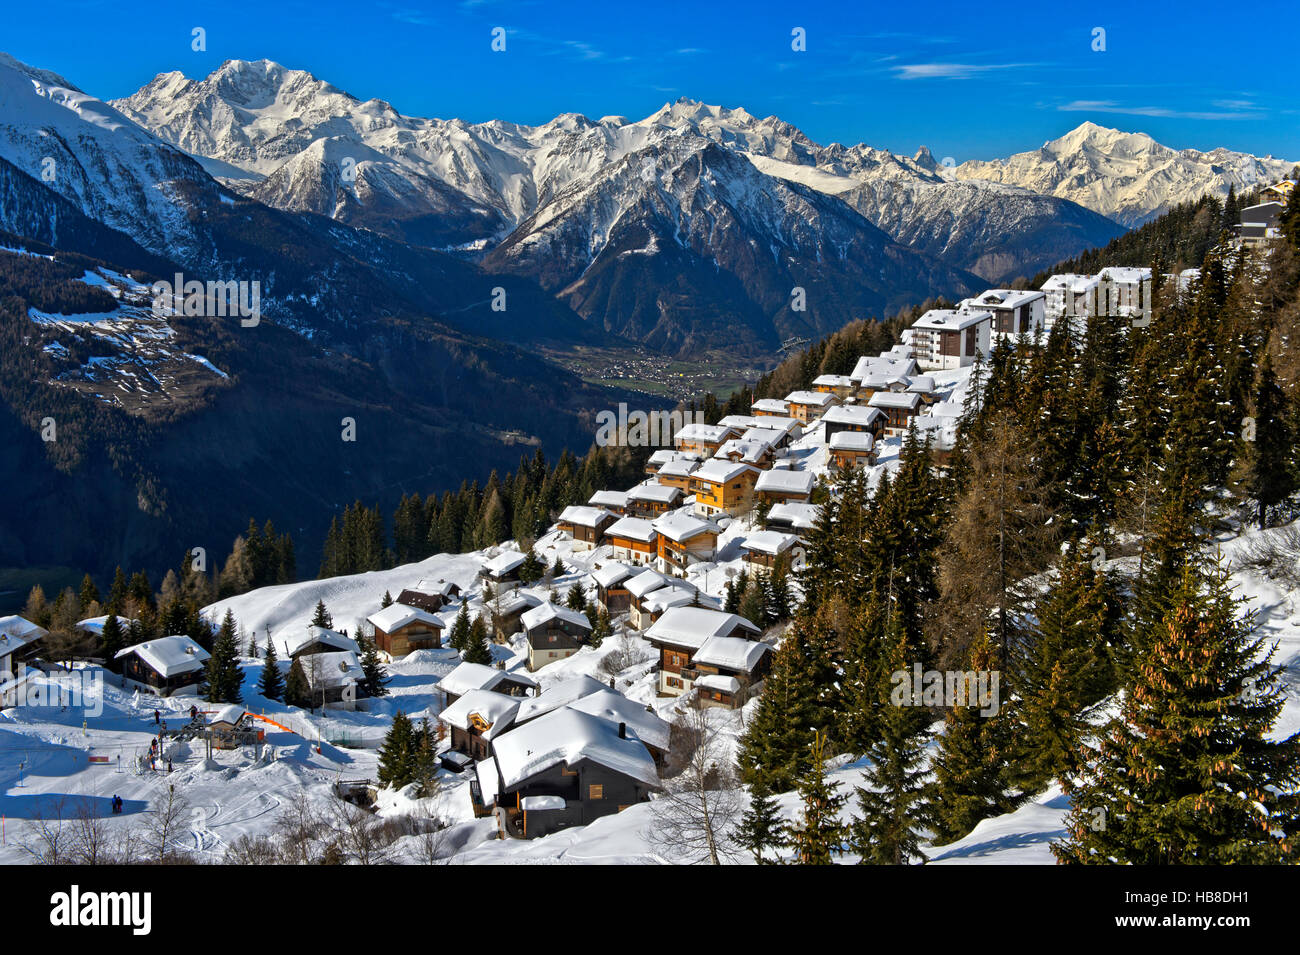 Bettmeralp under a thick blanket of snow with Weisshorn, Valais Alps, Canton of Valais, Switzerland Stock Photo